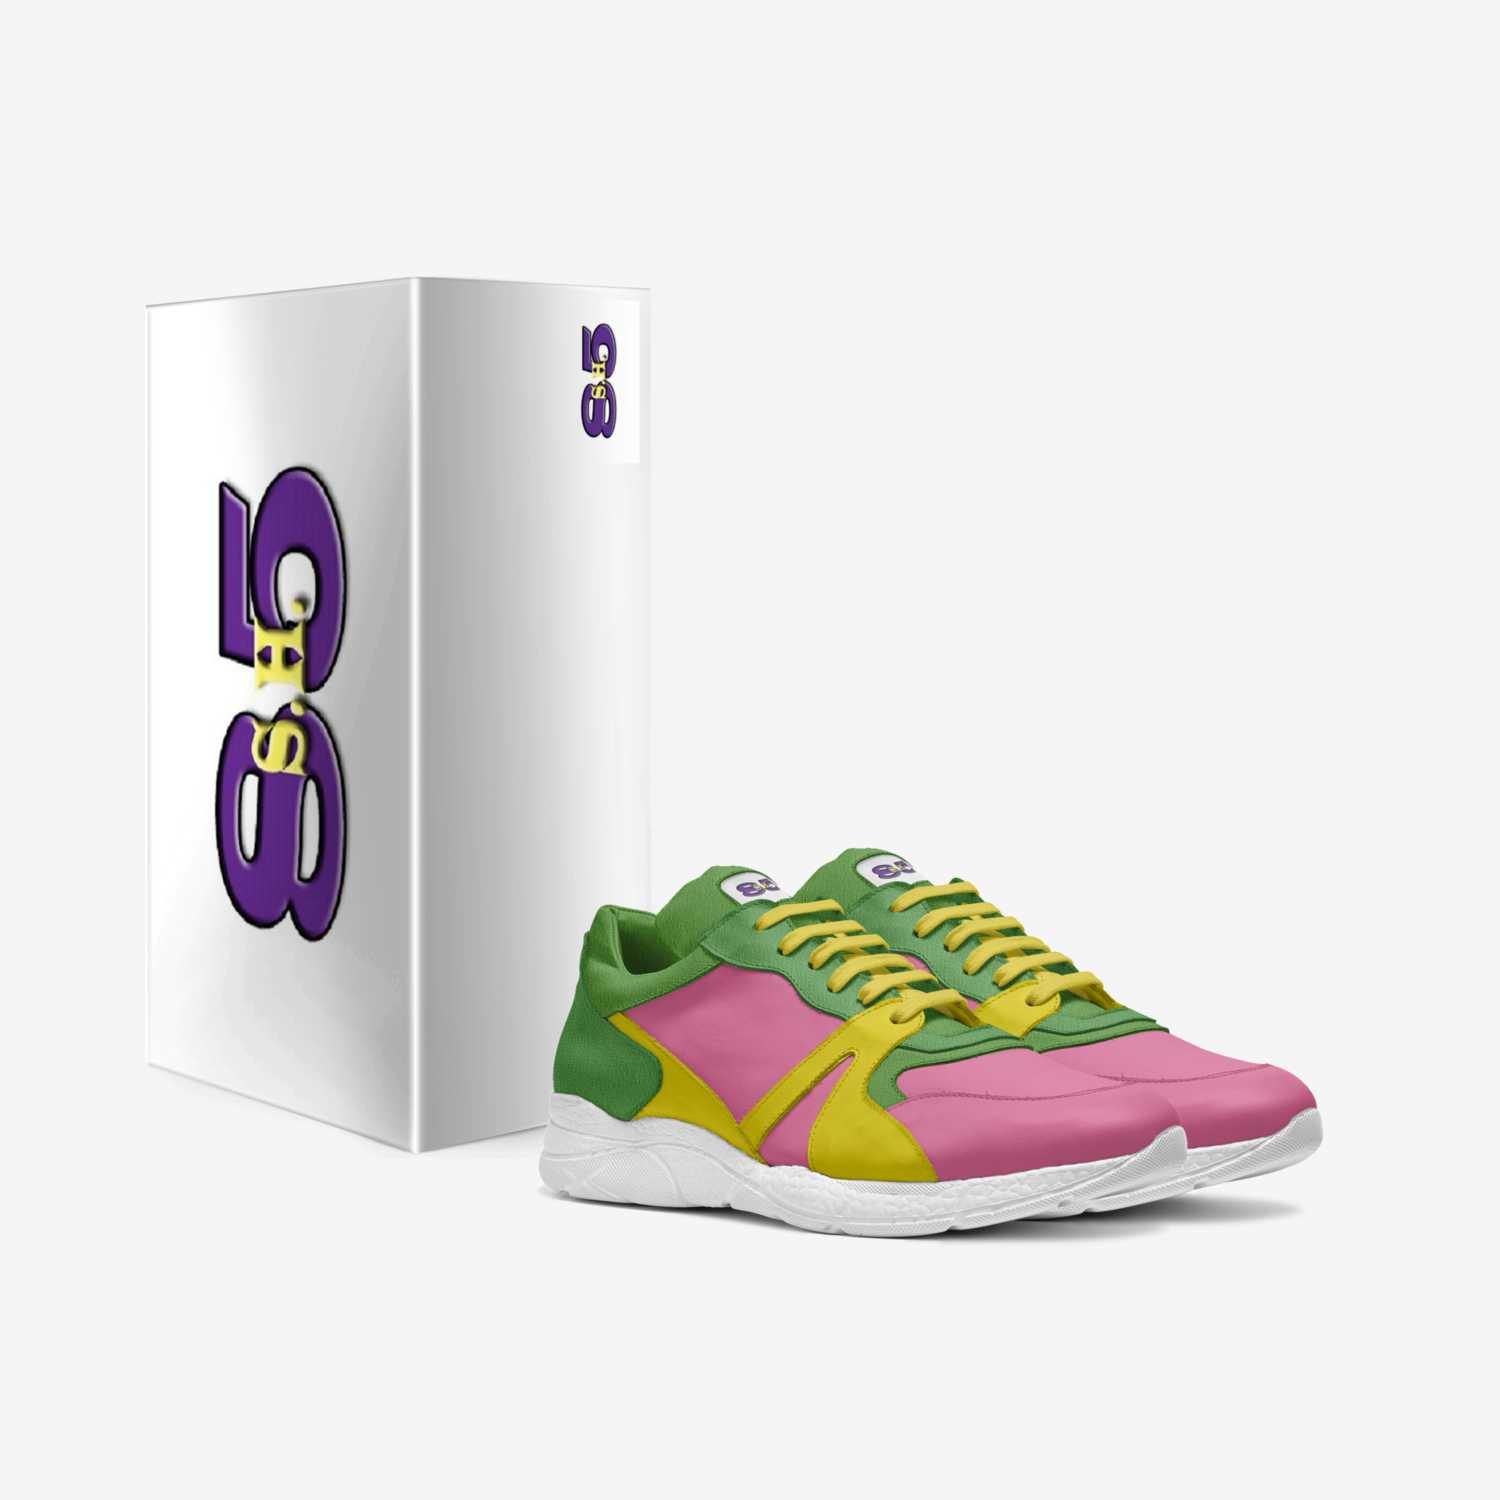 L.S.O.G. EASTERS custom made in Italy shoes by Kevin Anthony | Box view